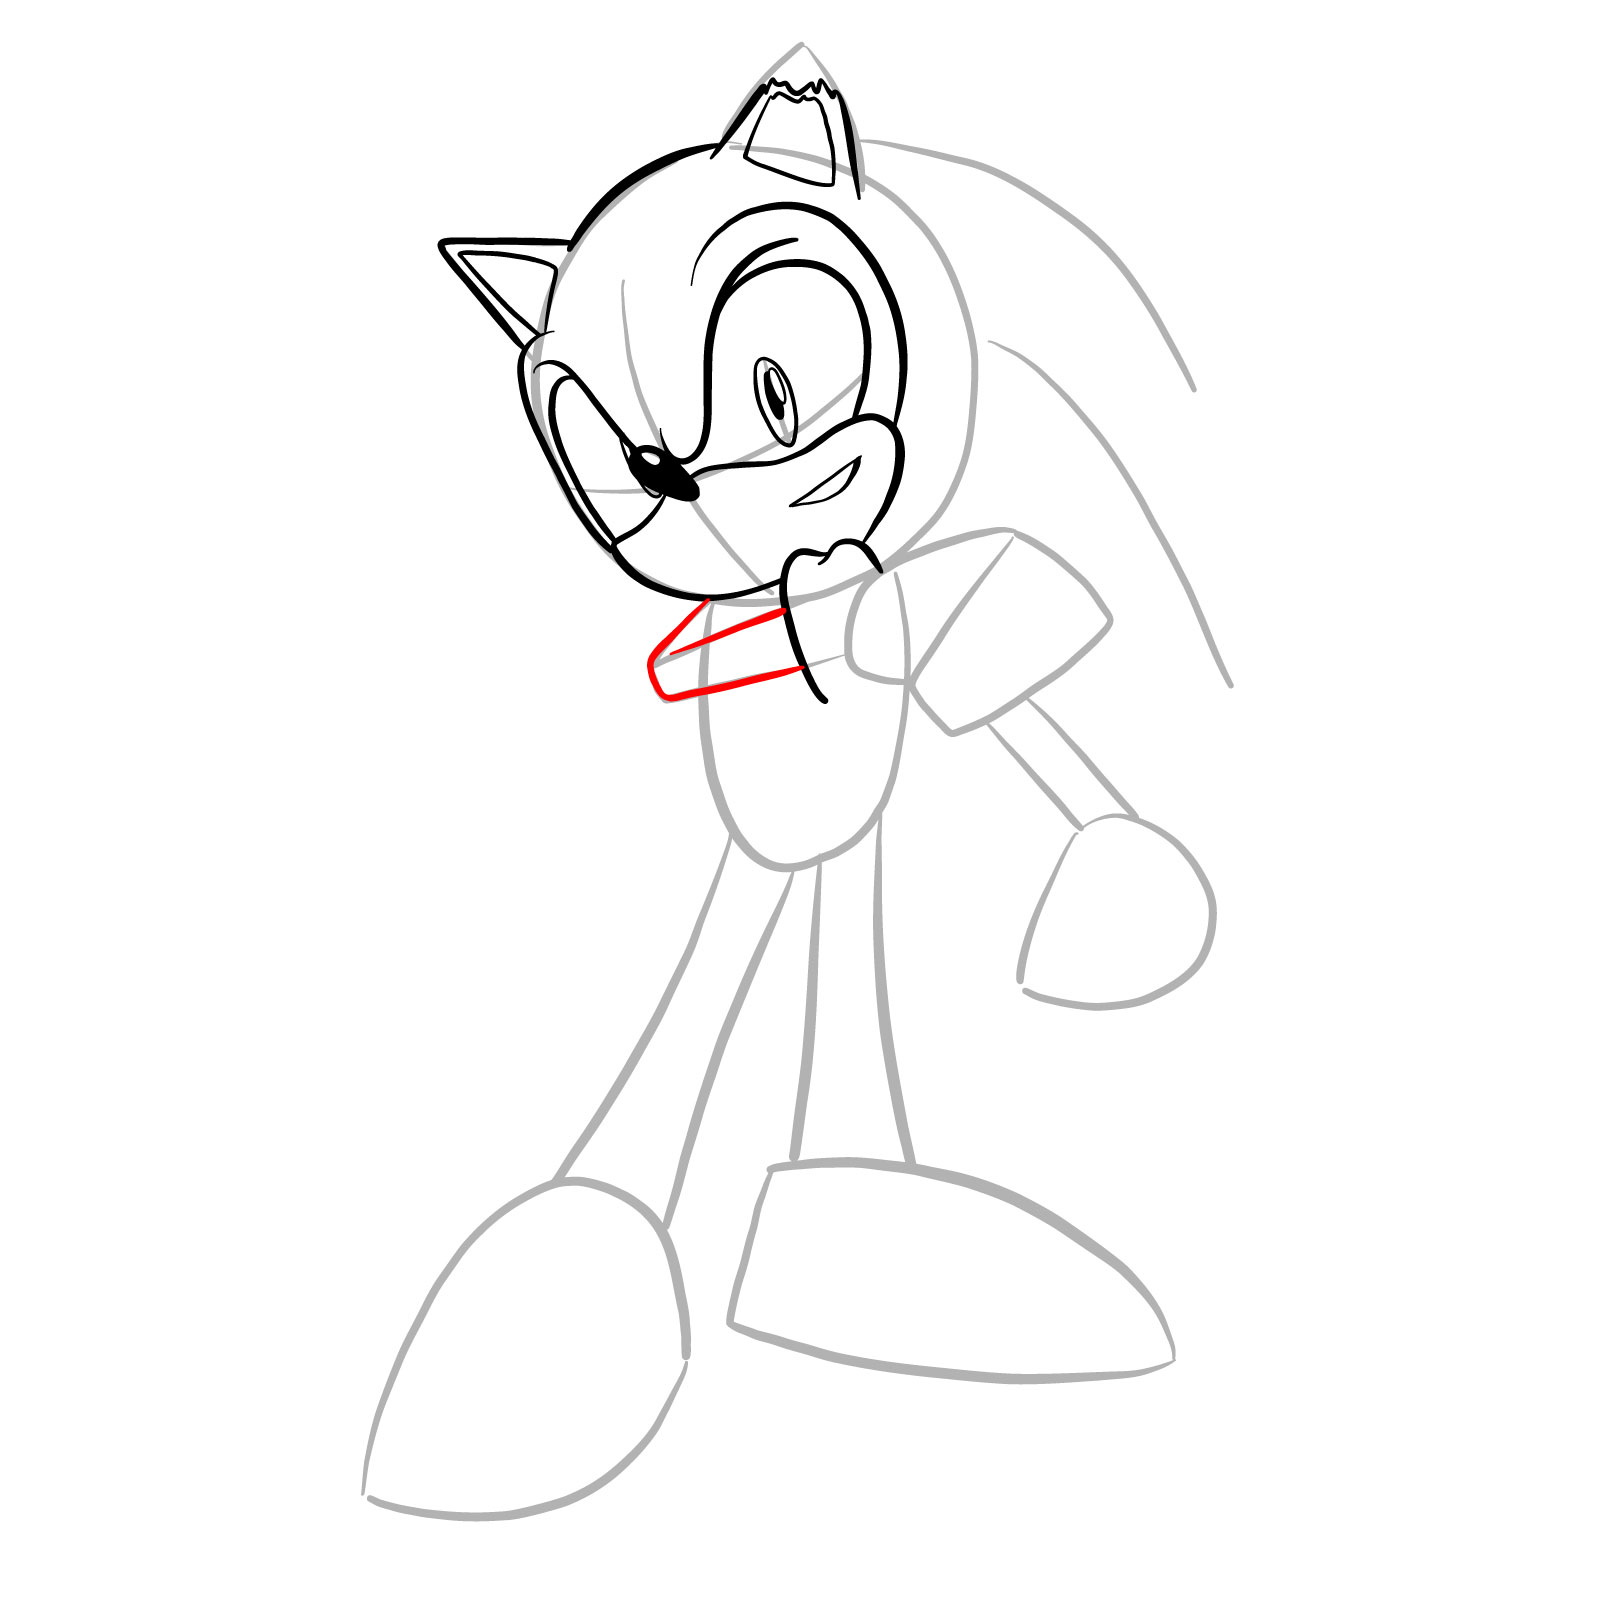 How to draw Coldsteel the Hedgehog - step 14